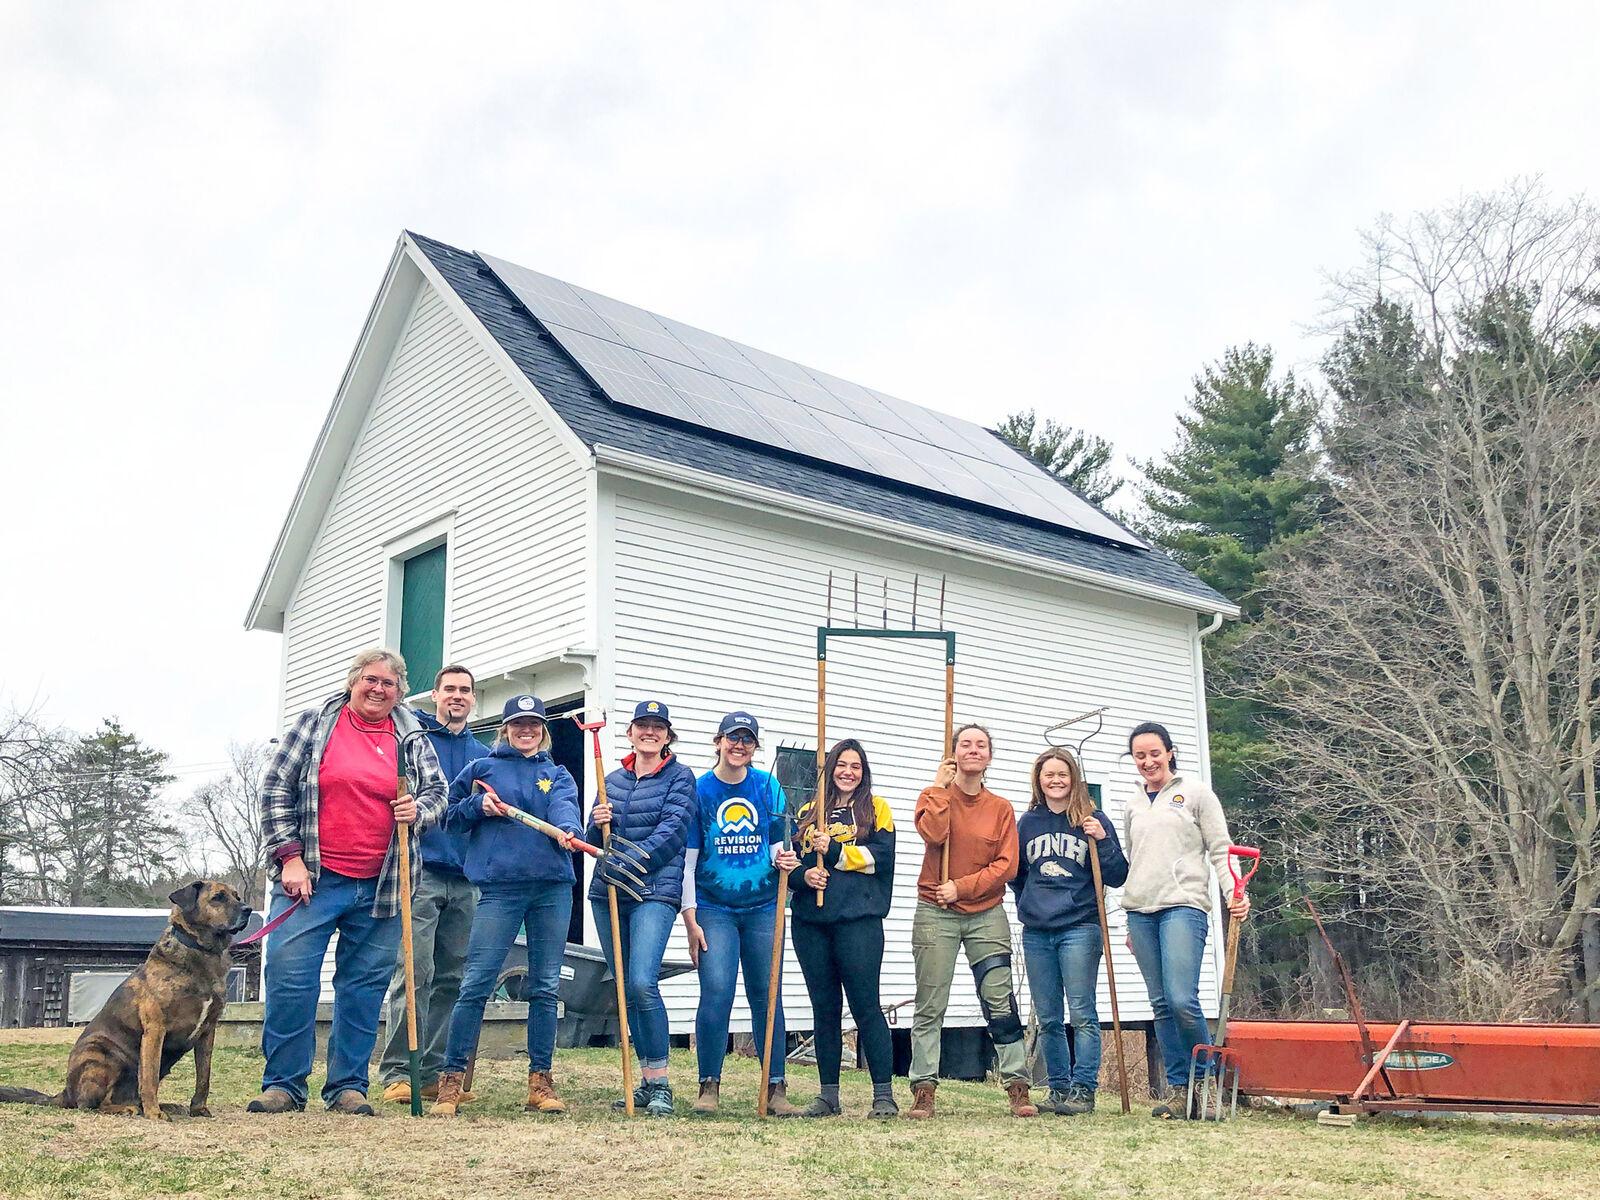 Local Farm Grows Community Support with Organic Crops and Solar Power